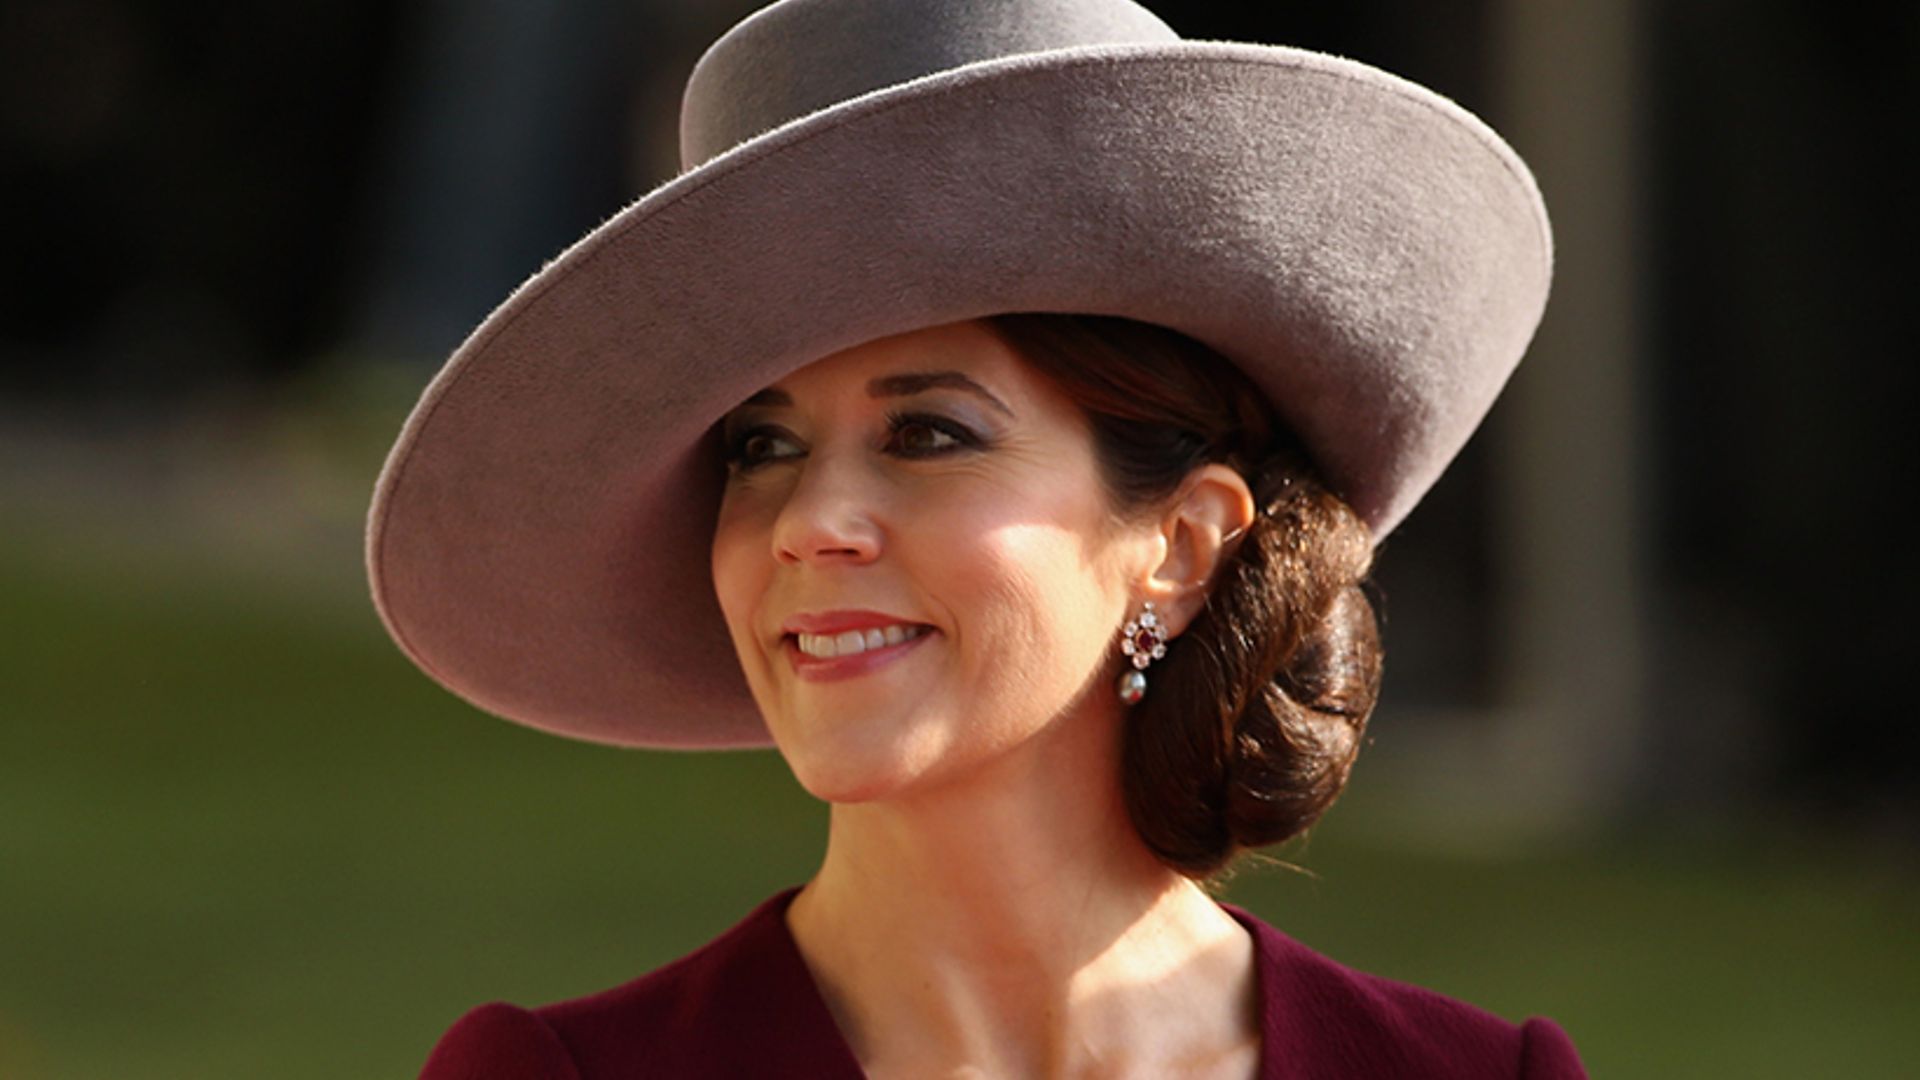 Who is Crown Princess Mary? Everything you need to know about Denmark's future queen consort